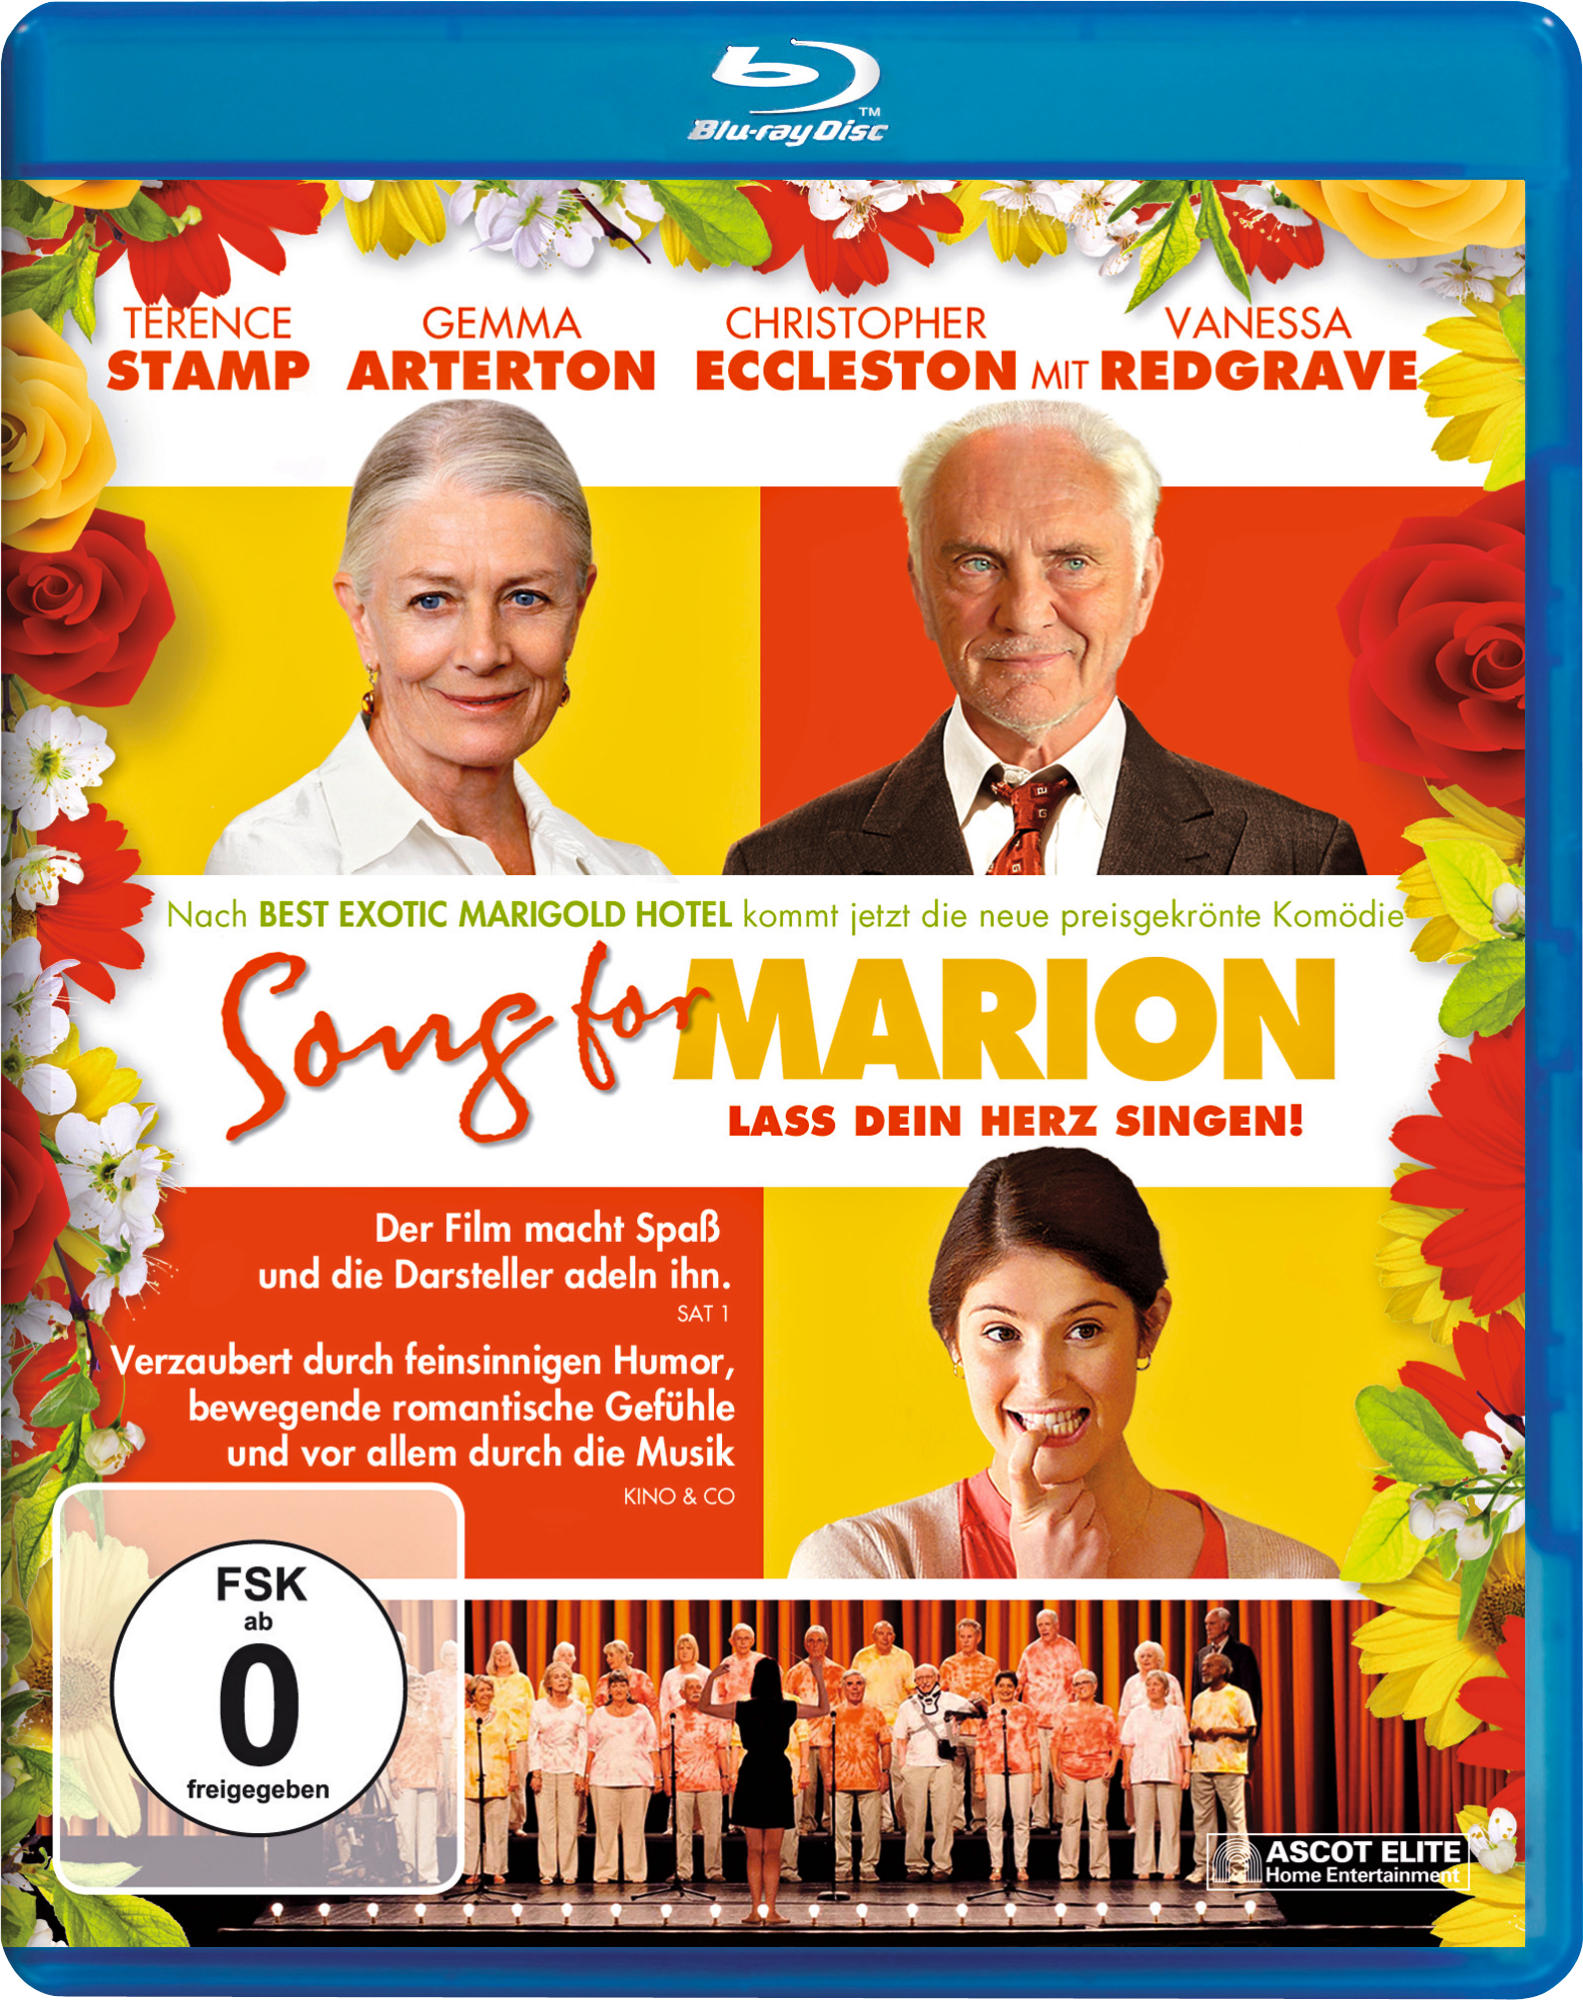 Blu-ray for Song Marion